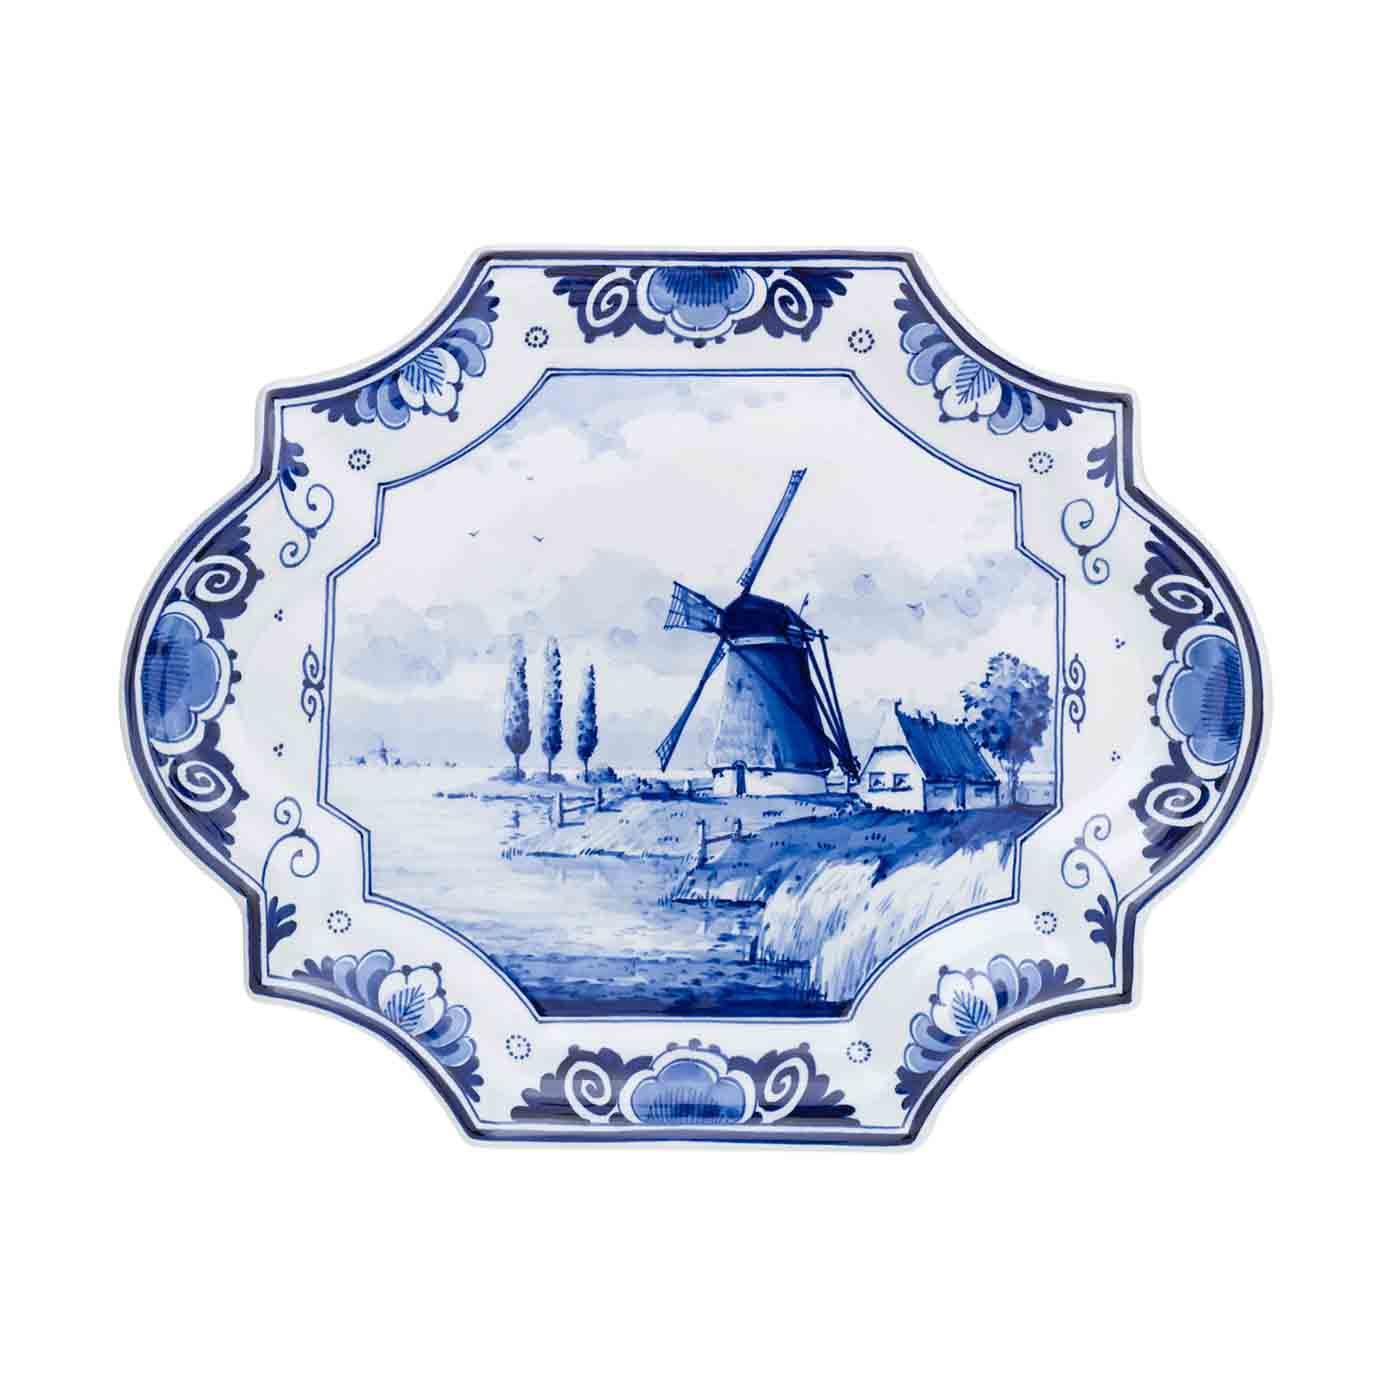 History of Blue-and-White Ceramics - Classic Color Combination